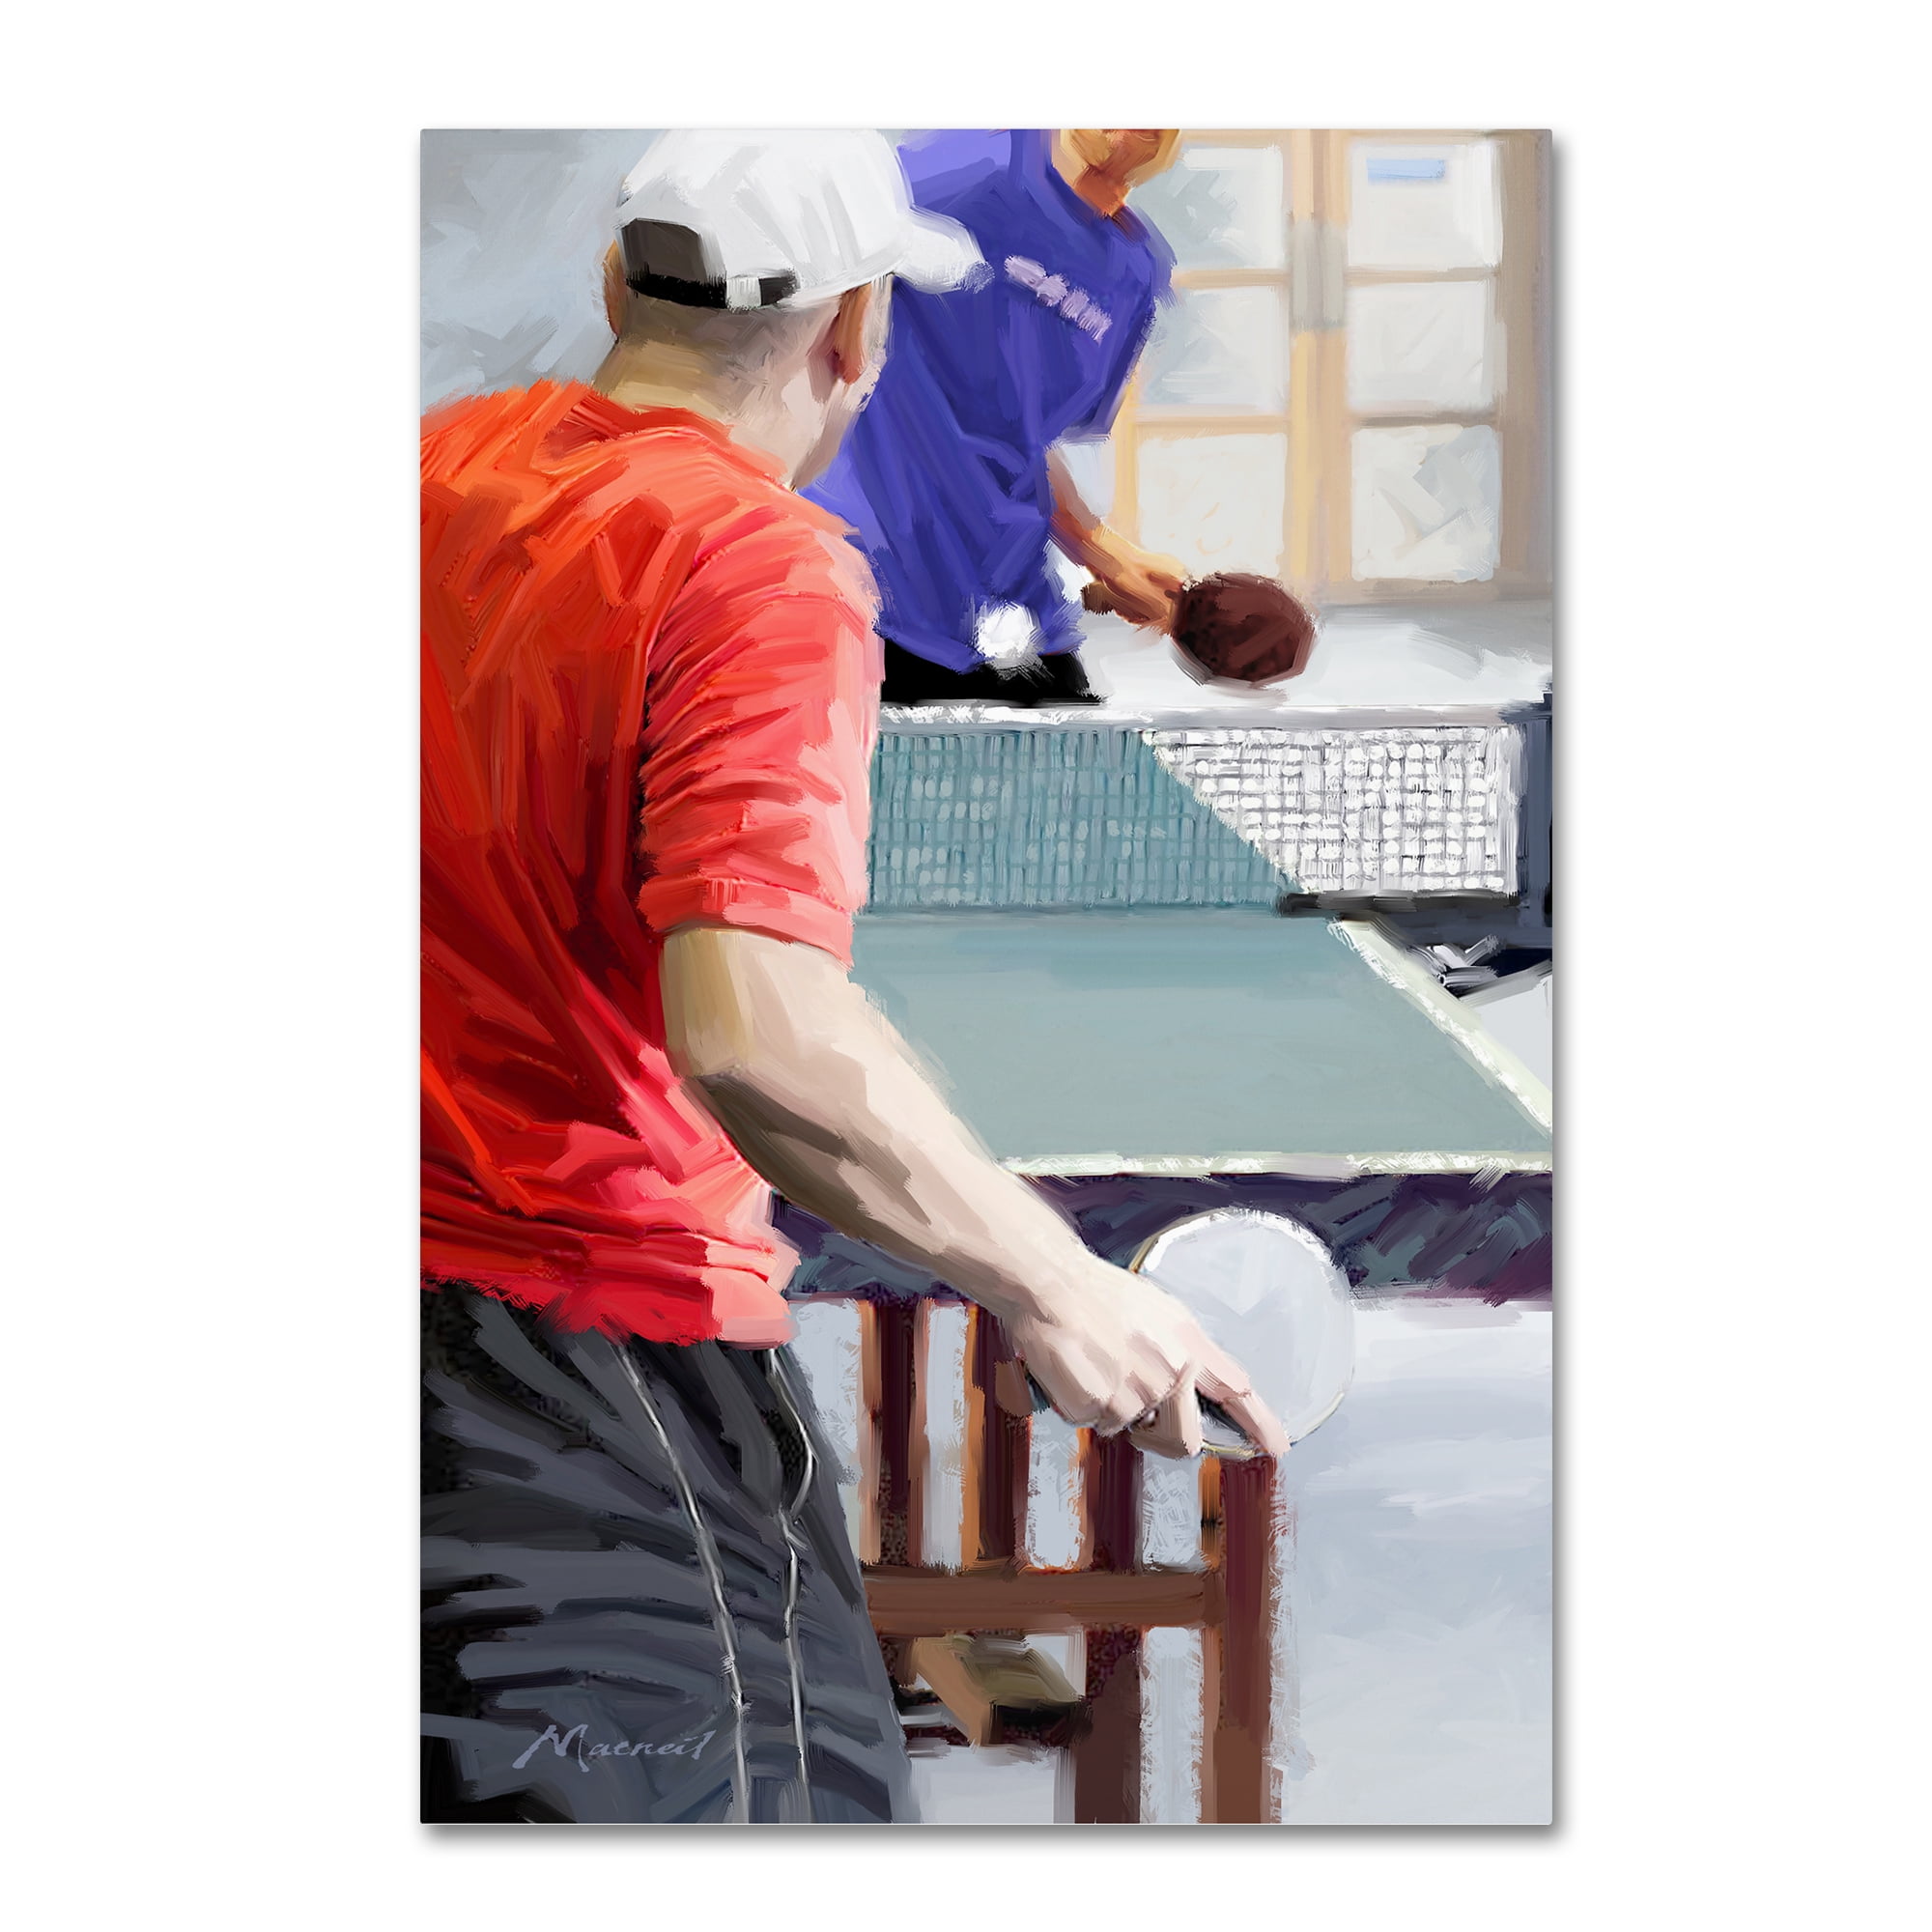 Ping-Pong Table Canvas domestic size - Art of Living - Sports and